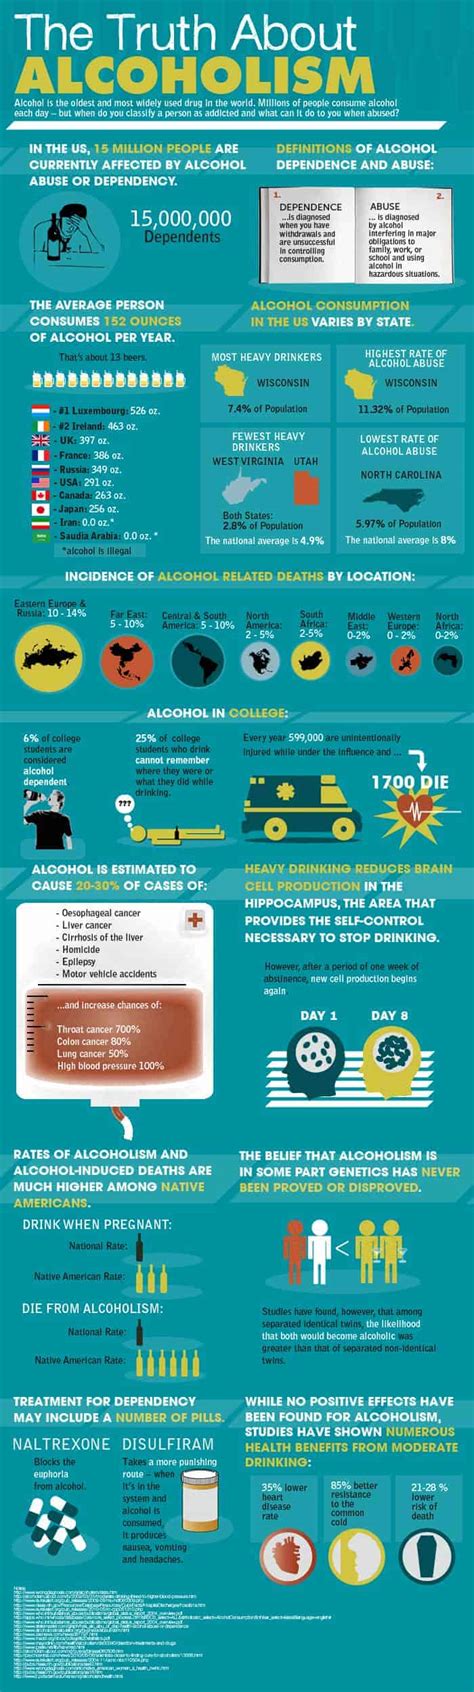 The Truth About Alcoholism Daily Infographic